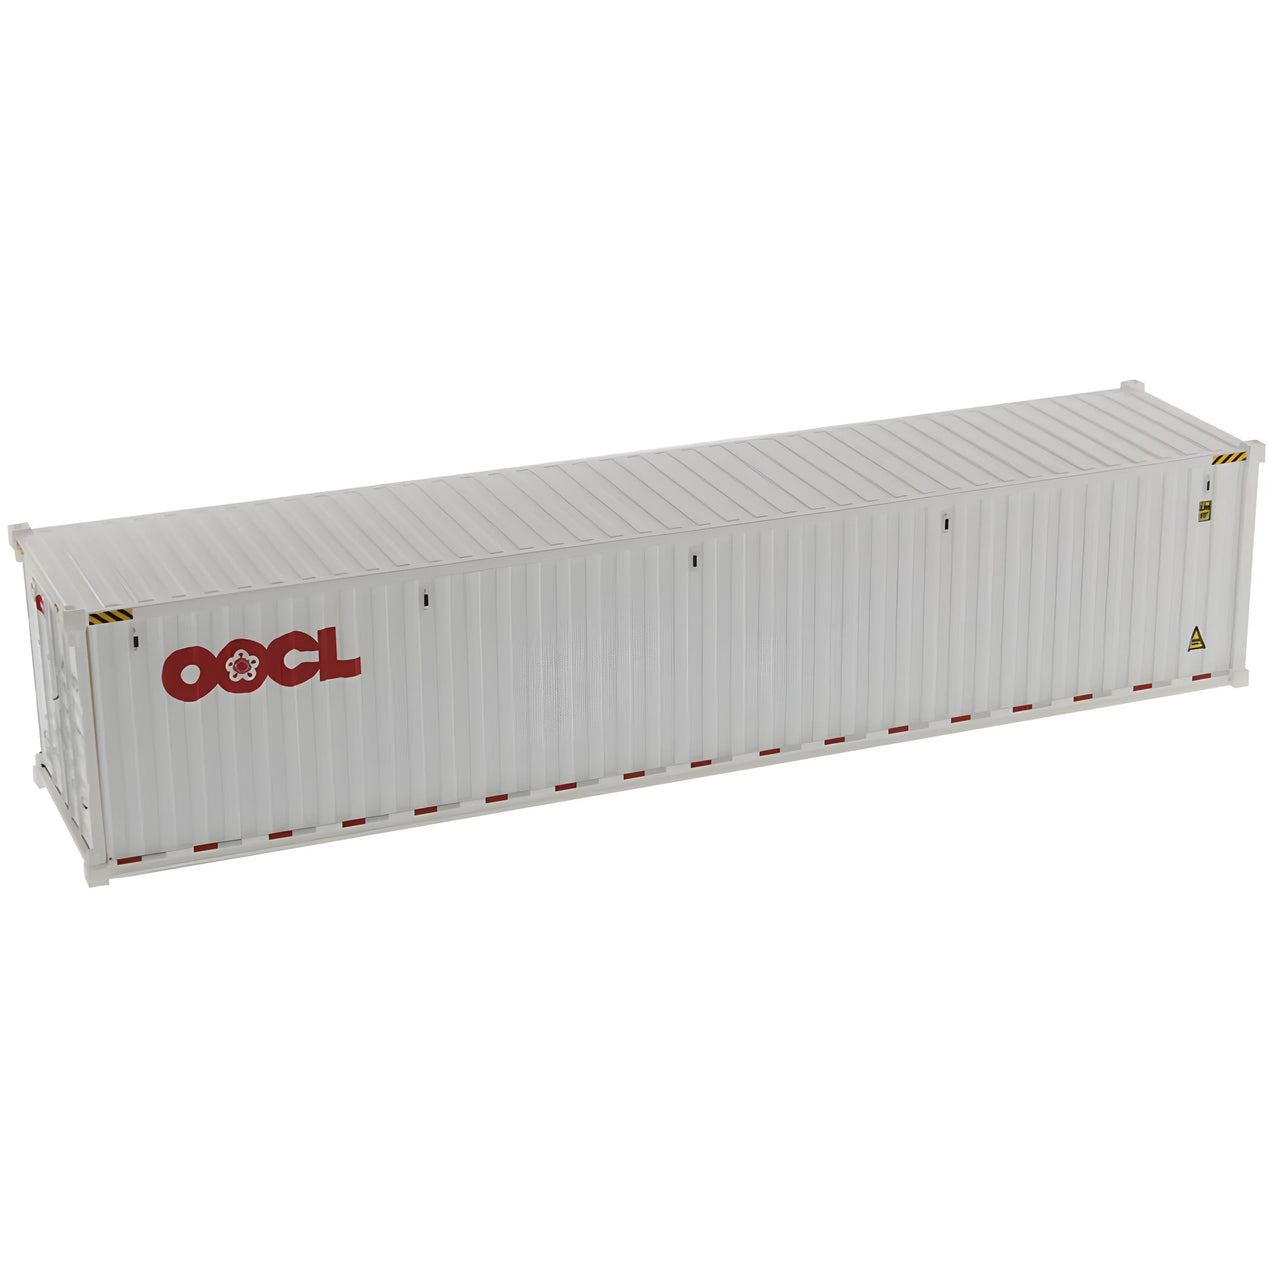 91027B 40' Dry Goods Sea Container 1:50 Scale